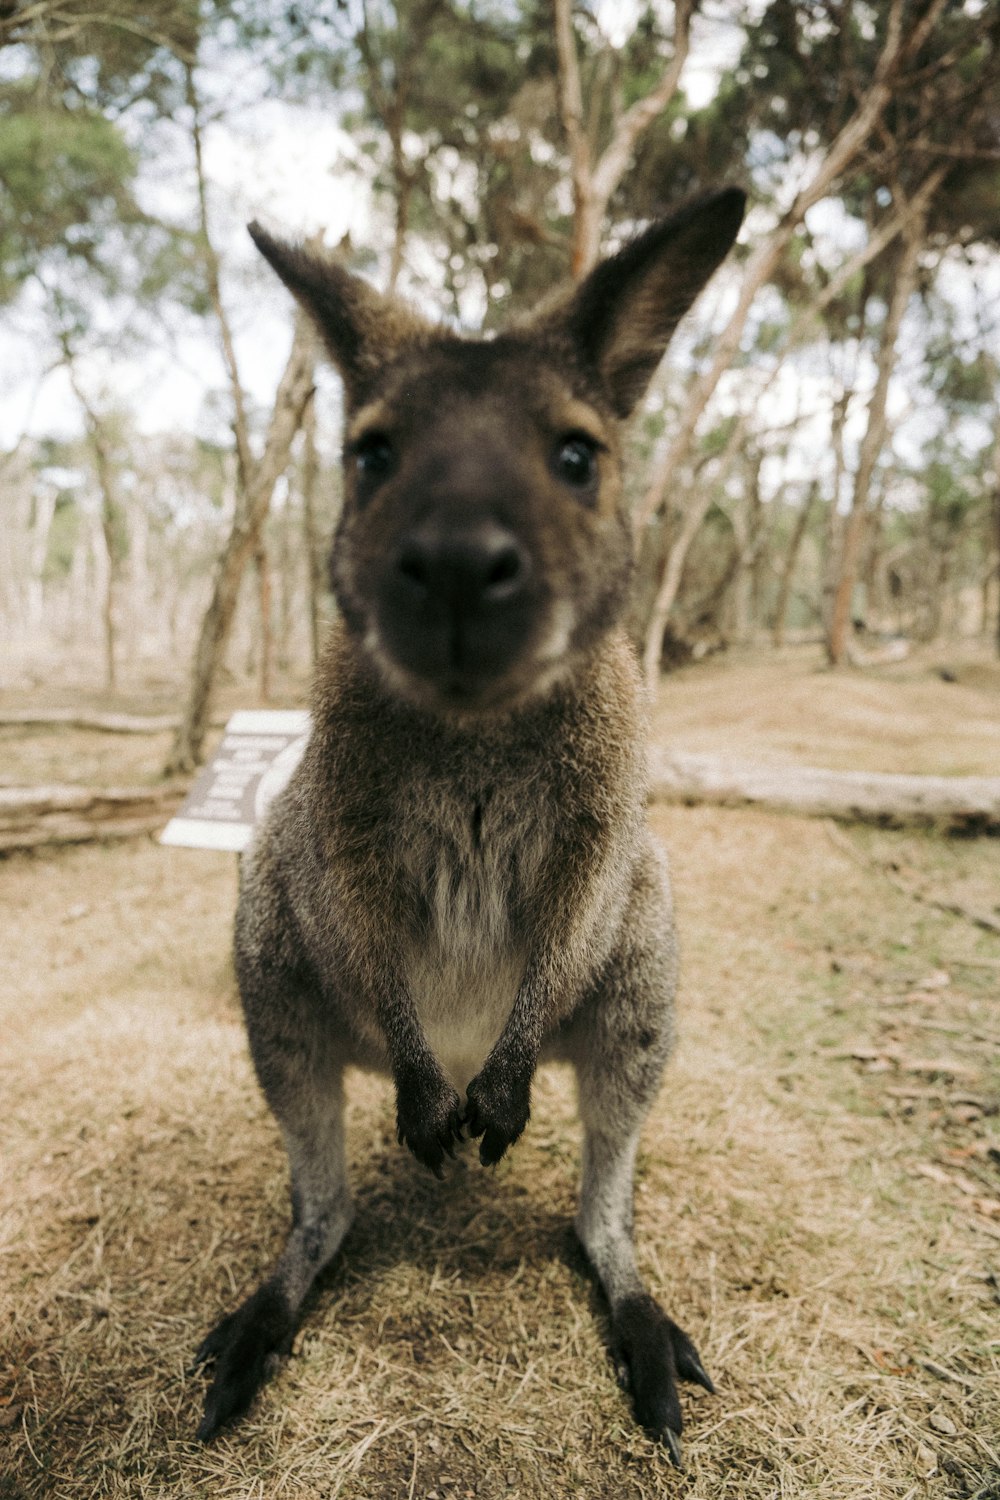 a close up of a kangaroo on the ground